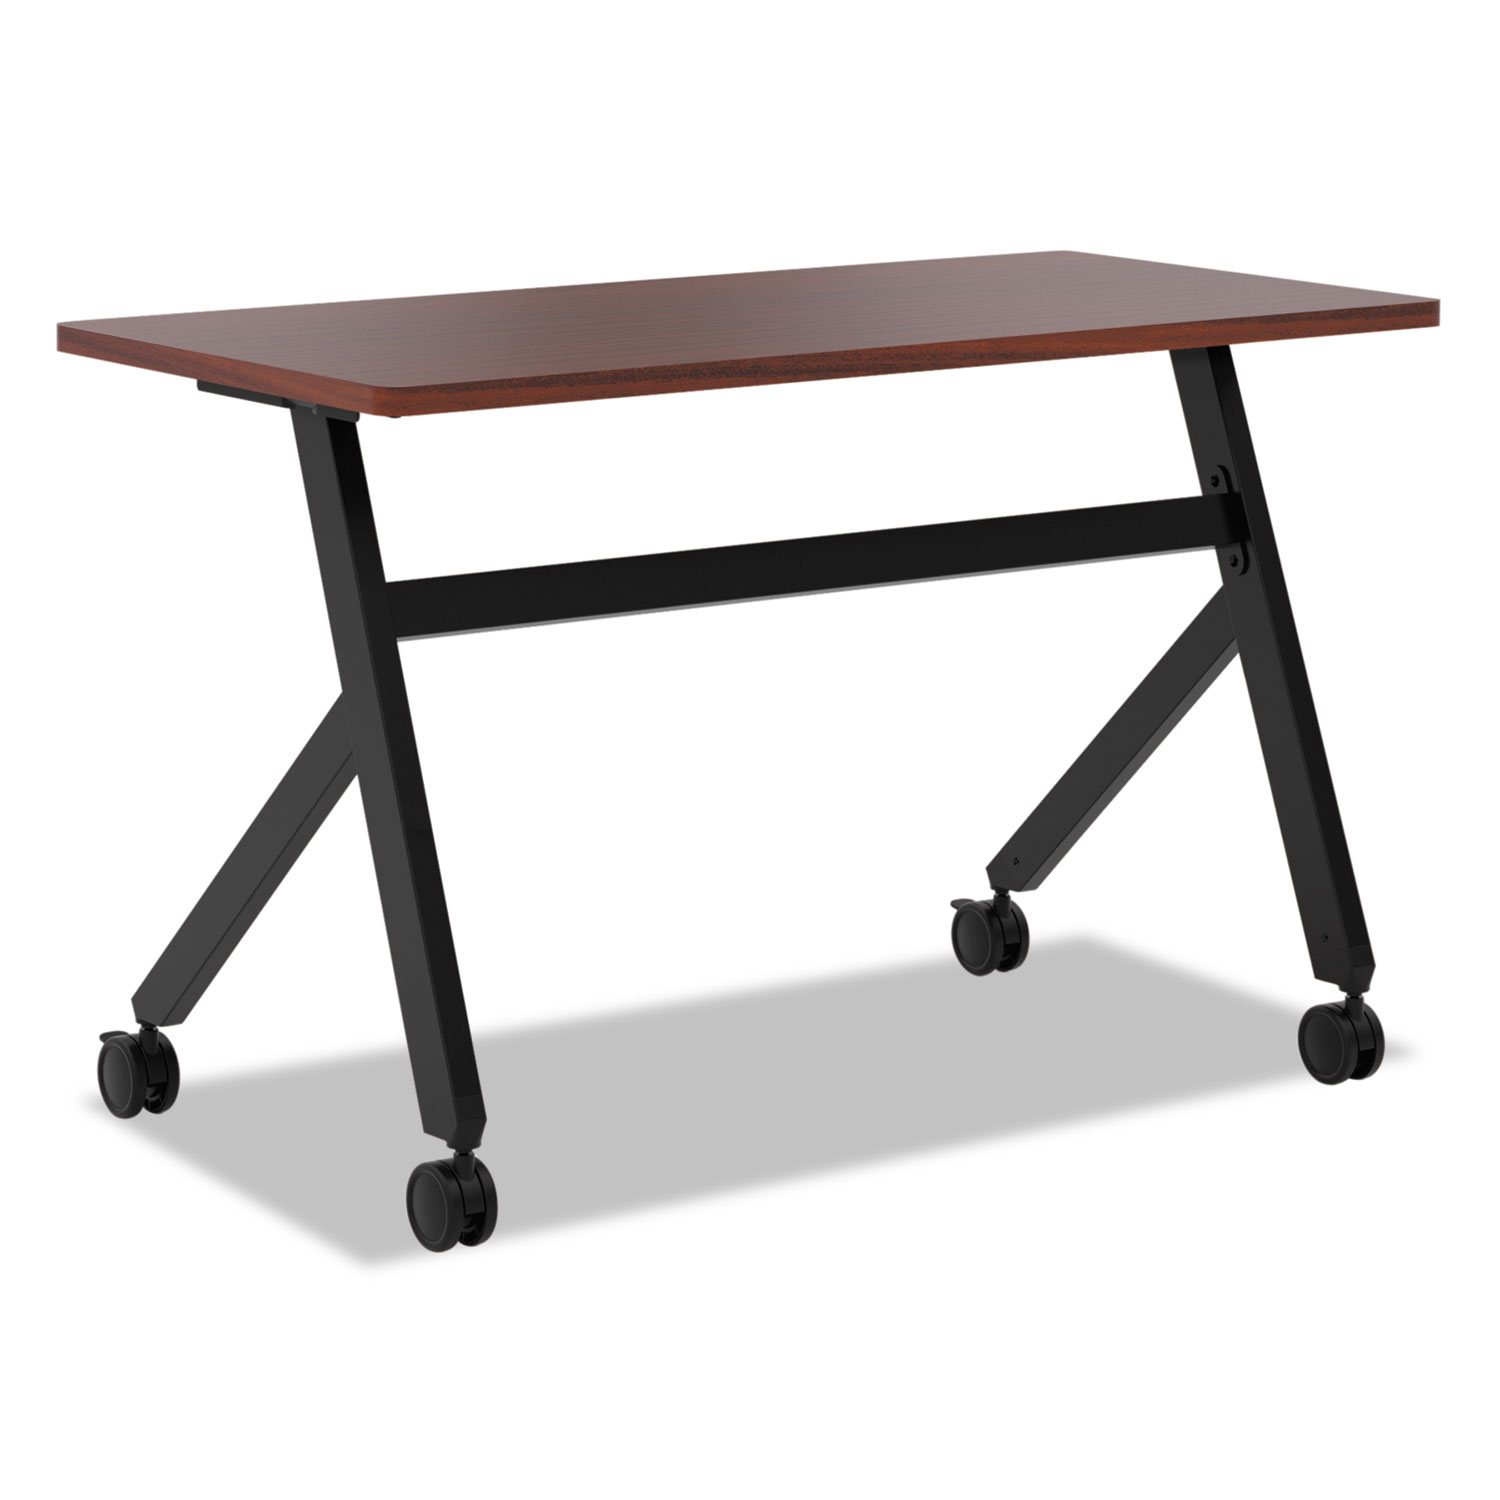 Multipurpose Table Fixed Base Table, 48w x 24d x 29 3/8h, Chestnut